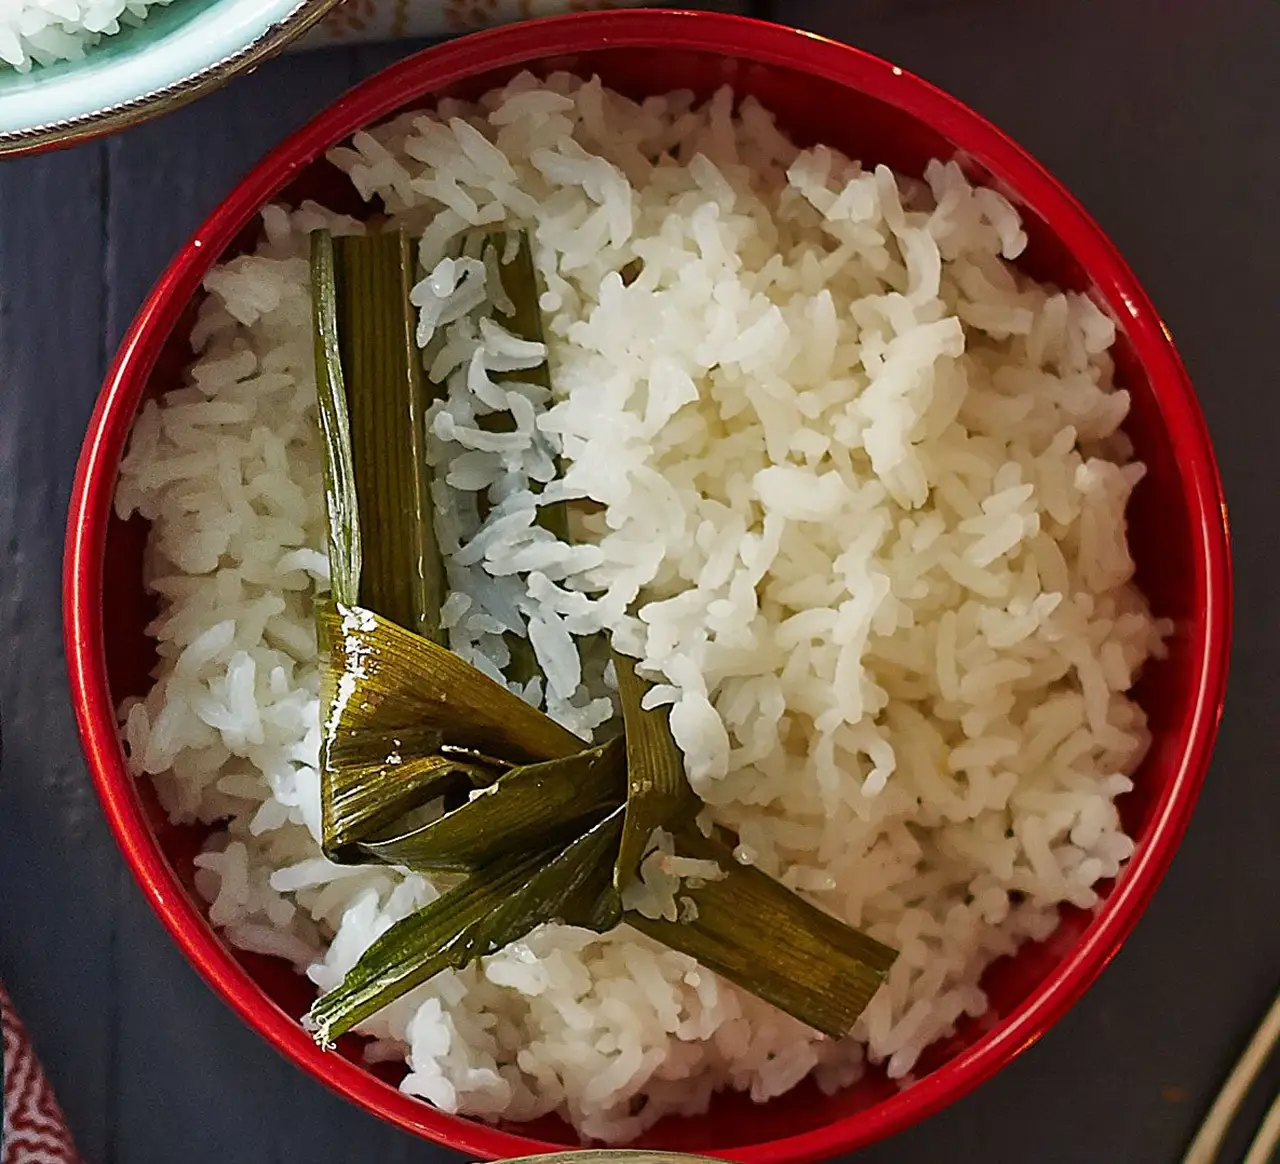 Pandan Leaves Can Make Your Rice Smell Exotic!